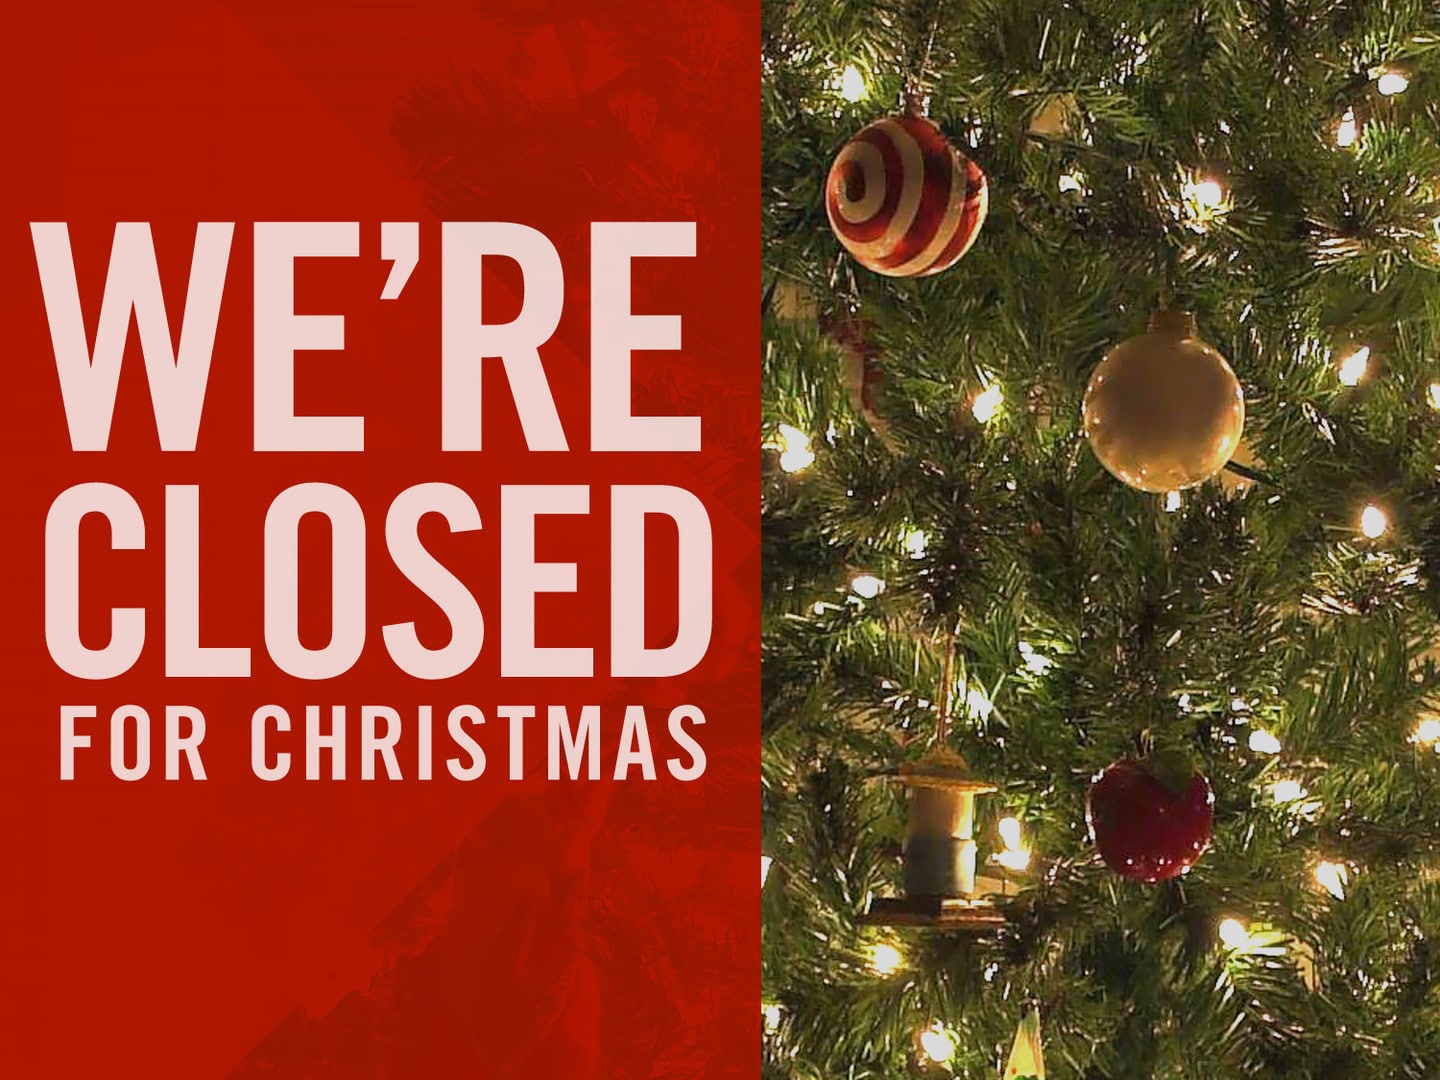 office closed for holiday sign example